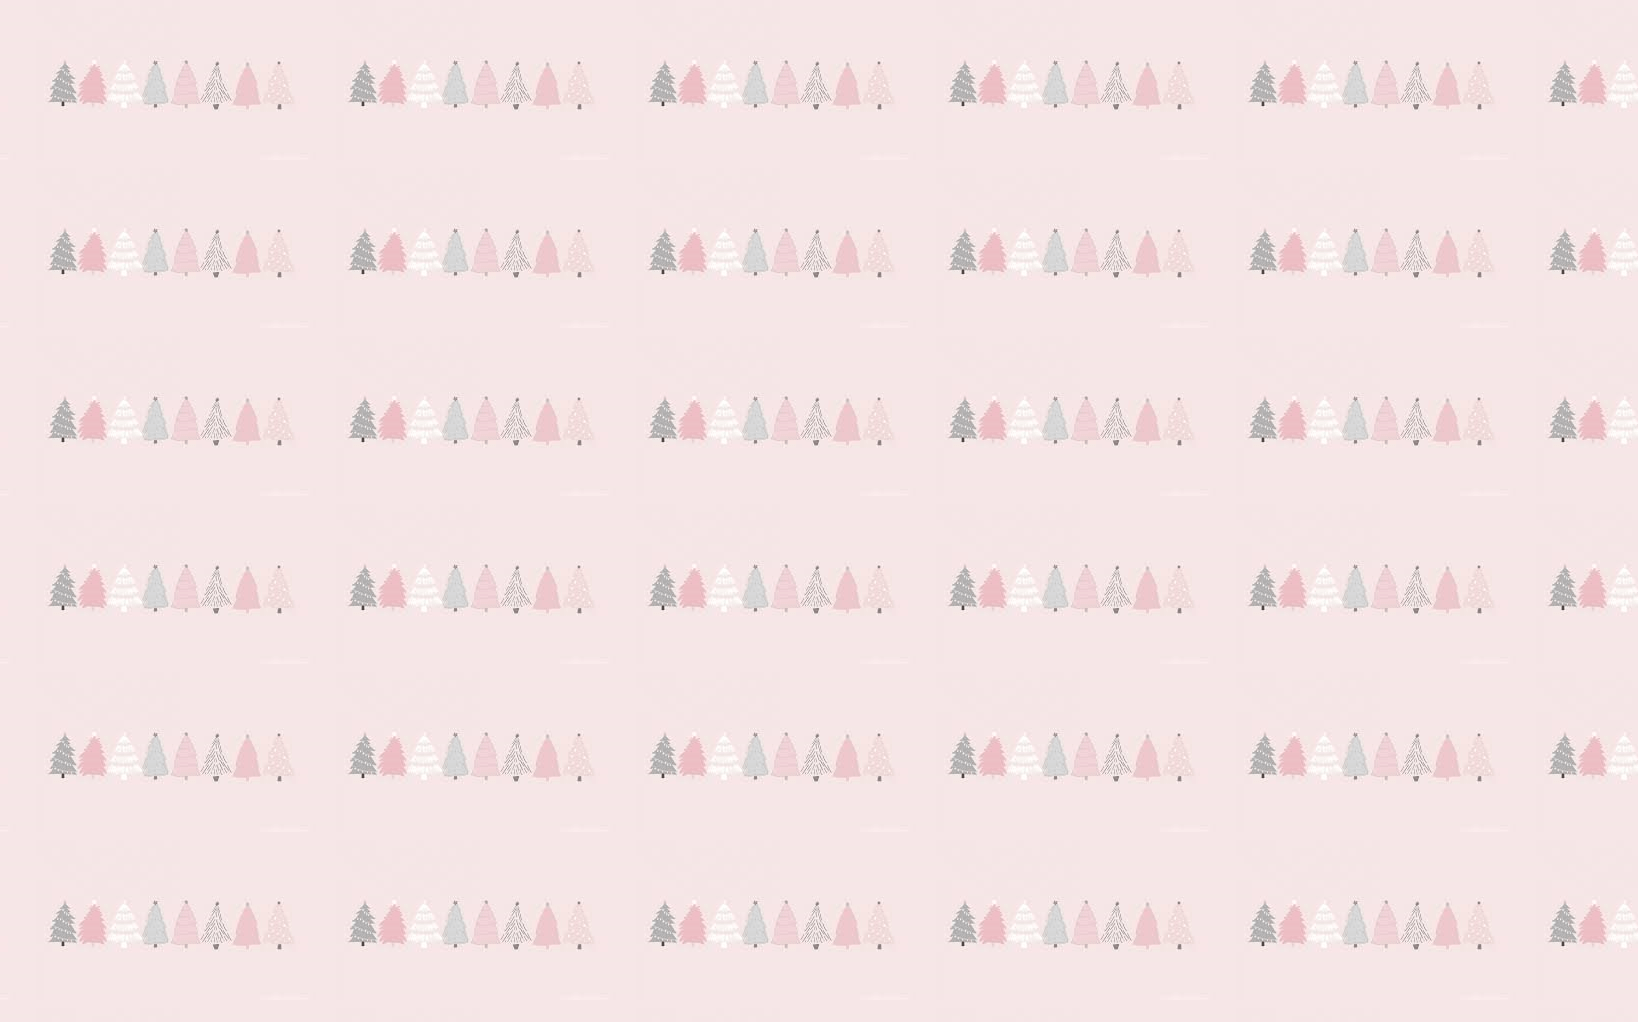 A pink and white pattern with trees - Cute pink, cute, cute Christmas